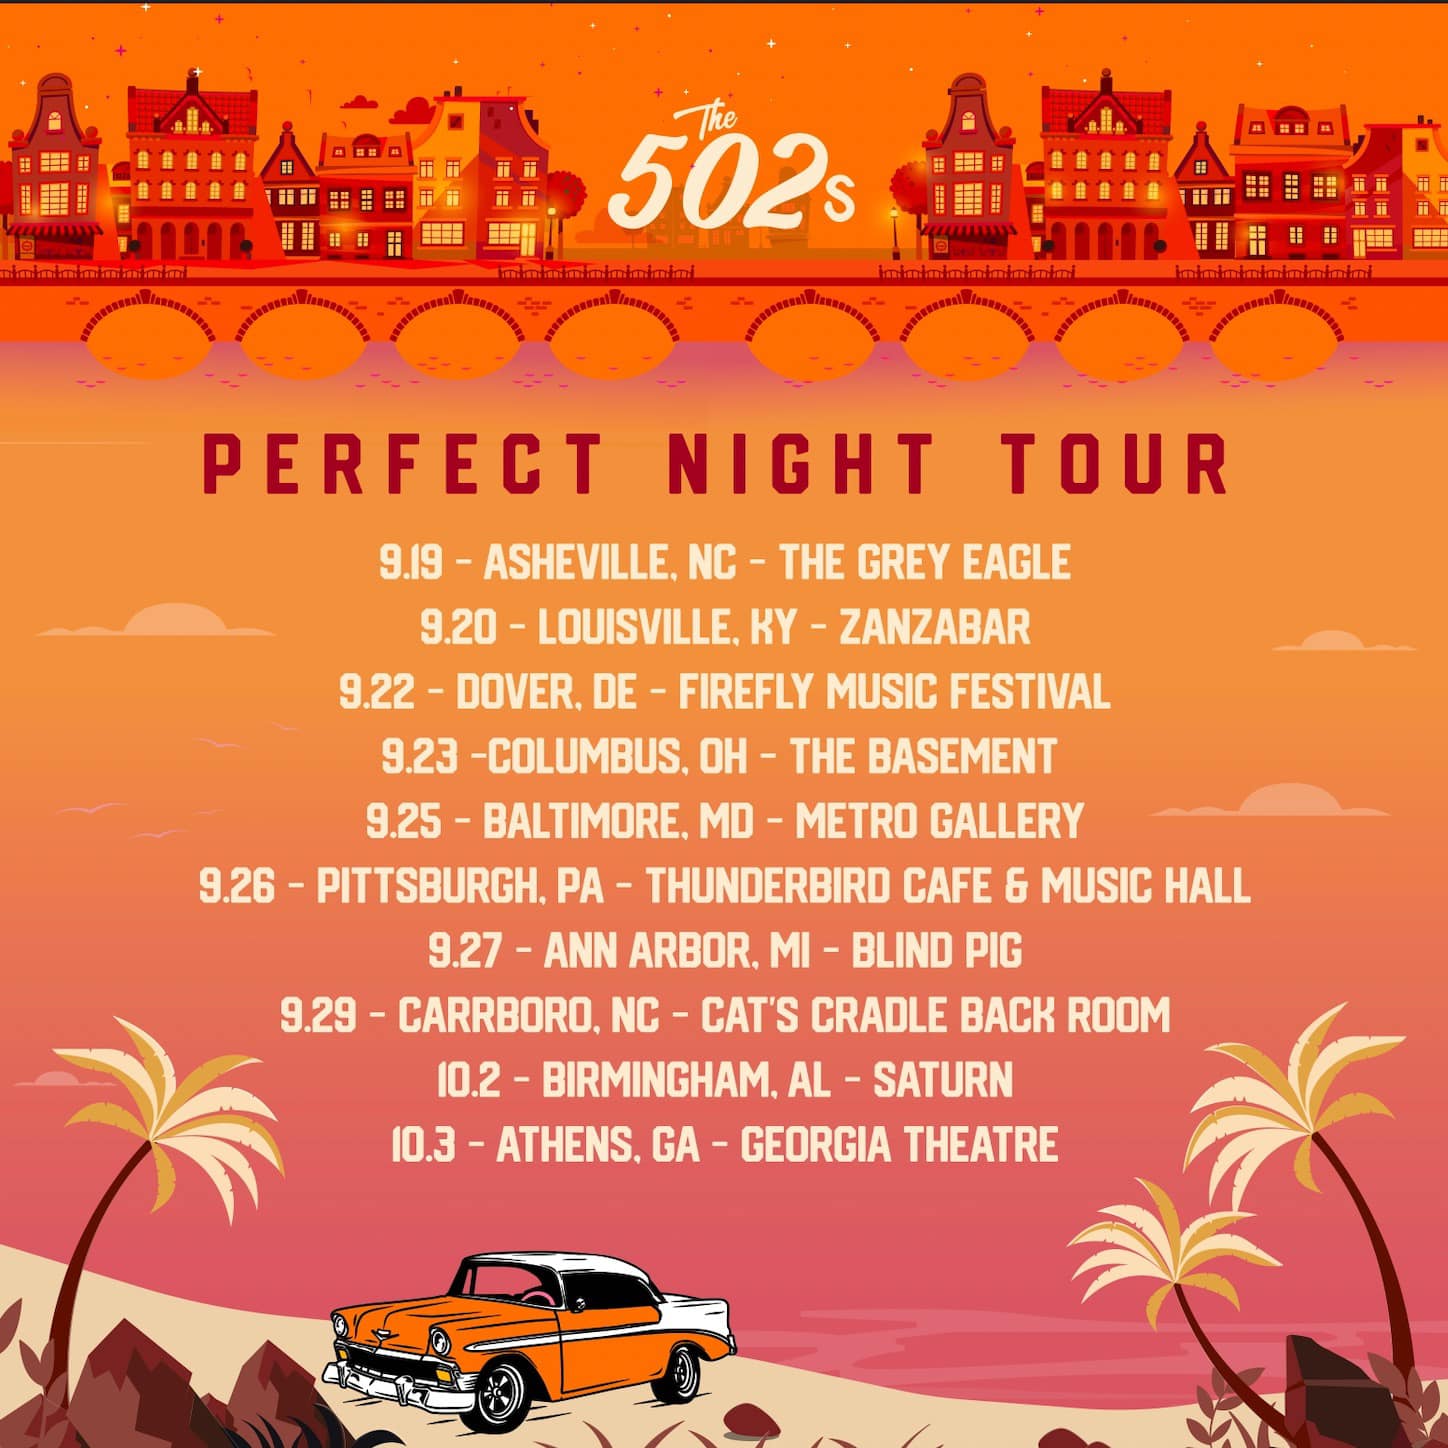 The 502s Perfect Night Tour